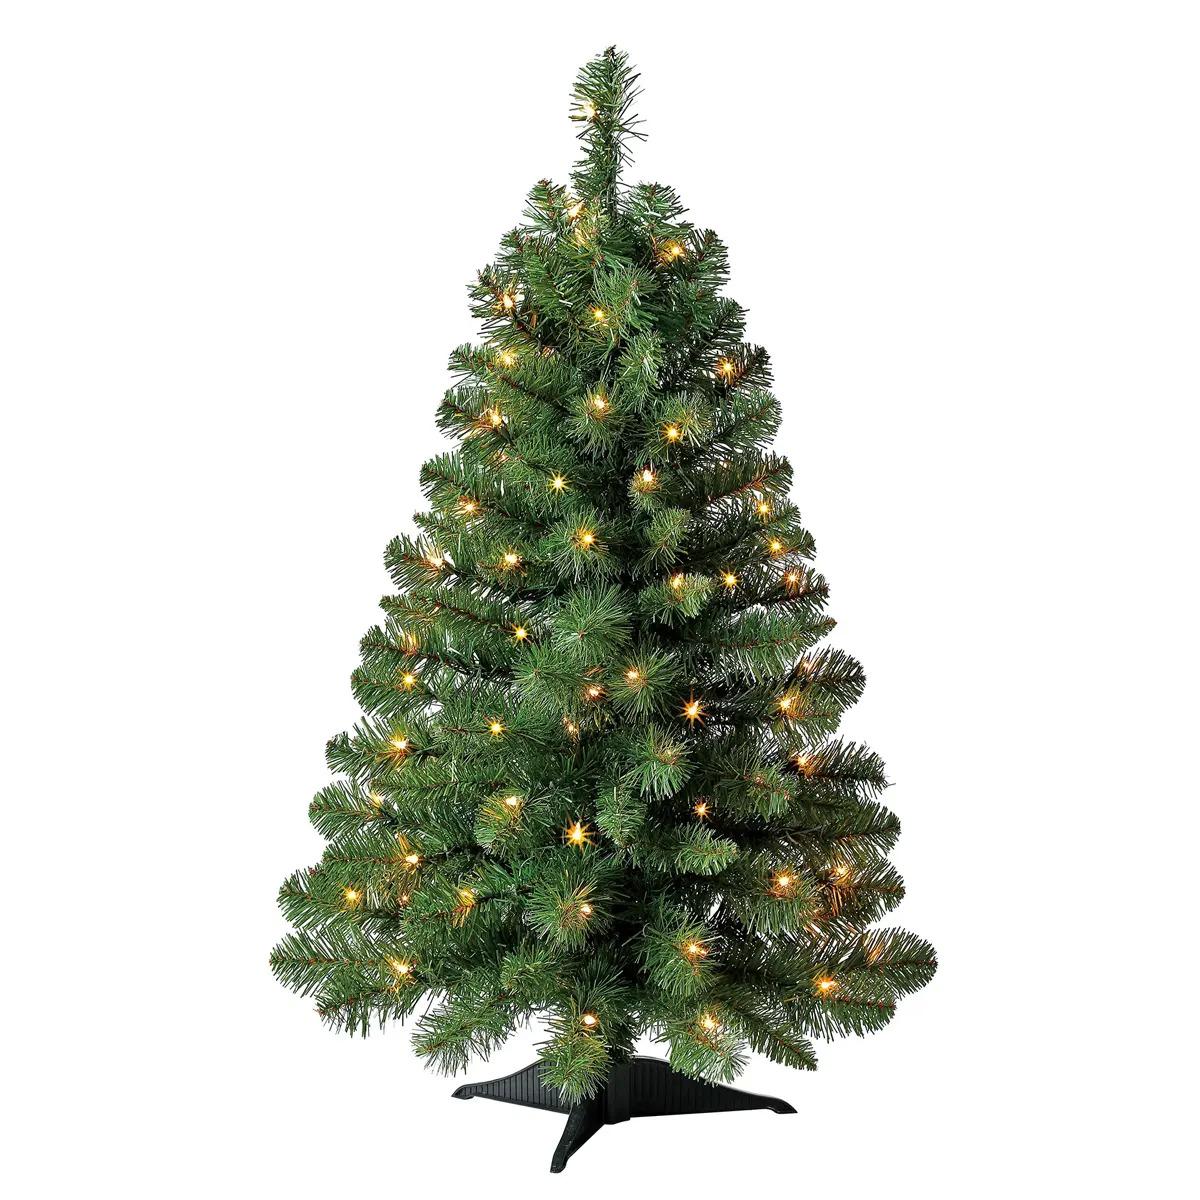 3ft Holiday Time Prelit Winston Pine Artificial Christmas Tree for $7.98